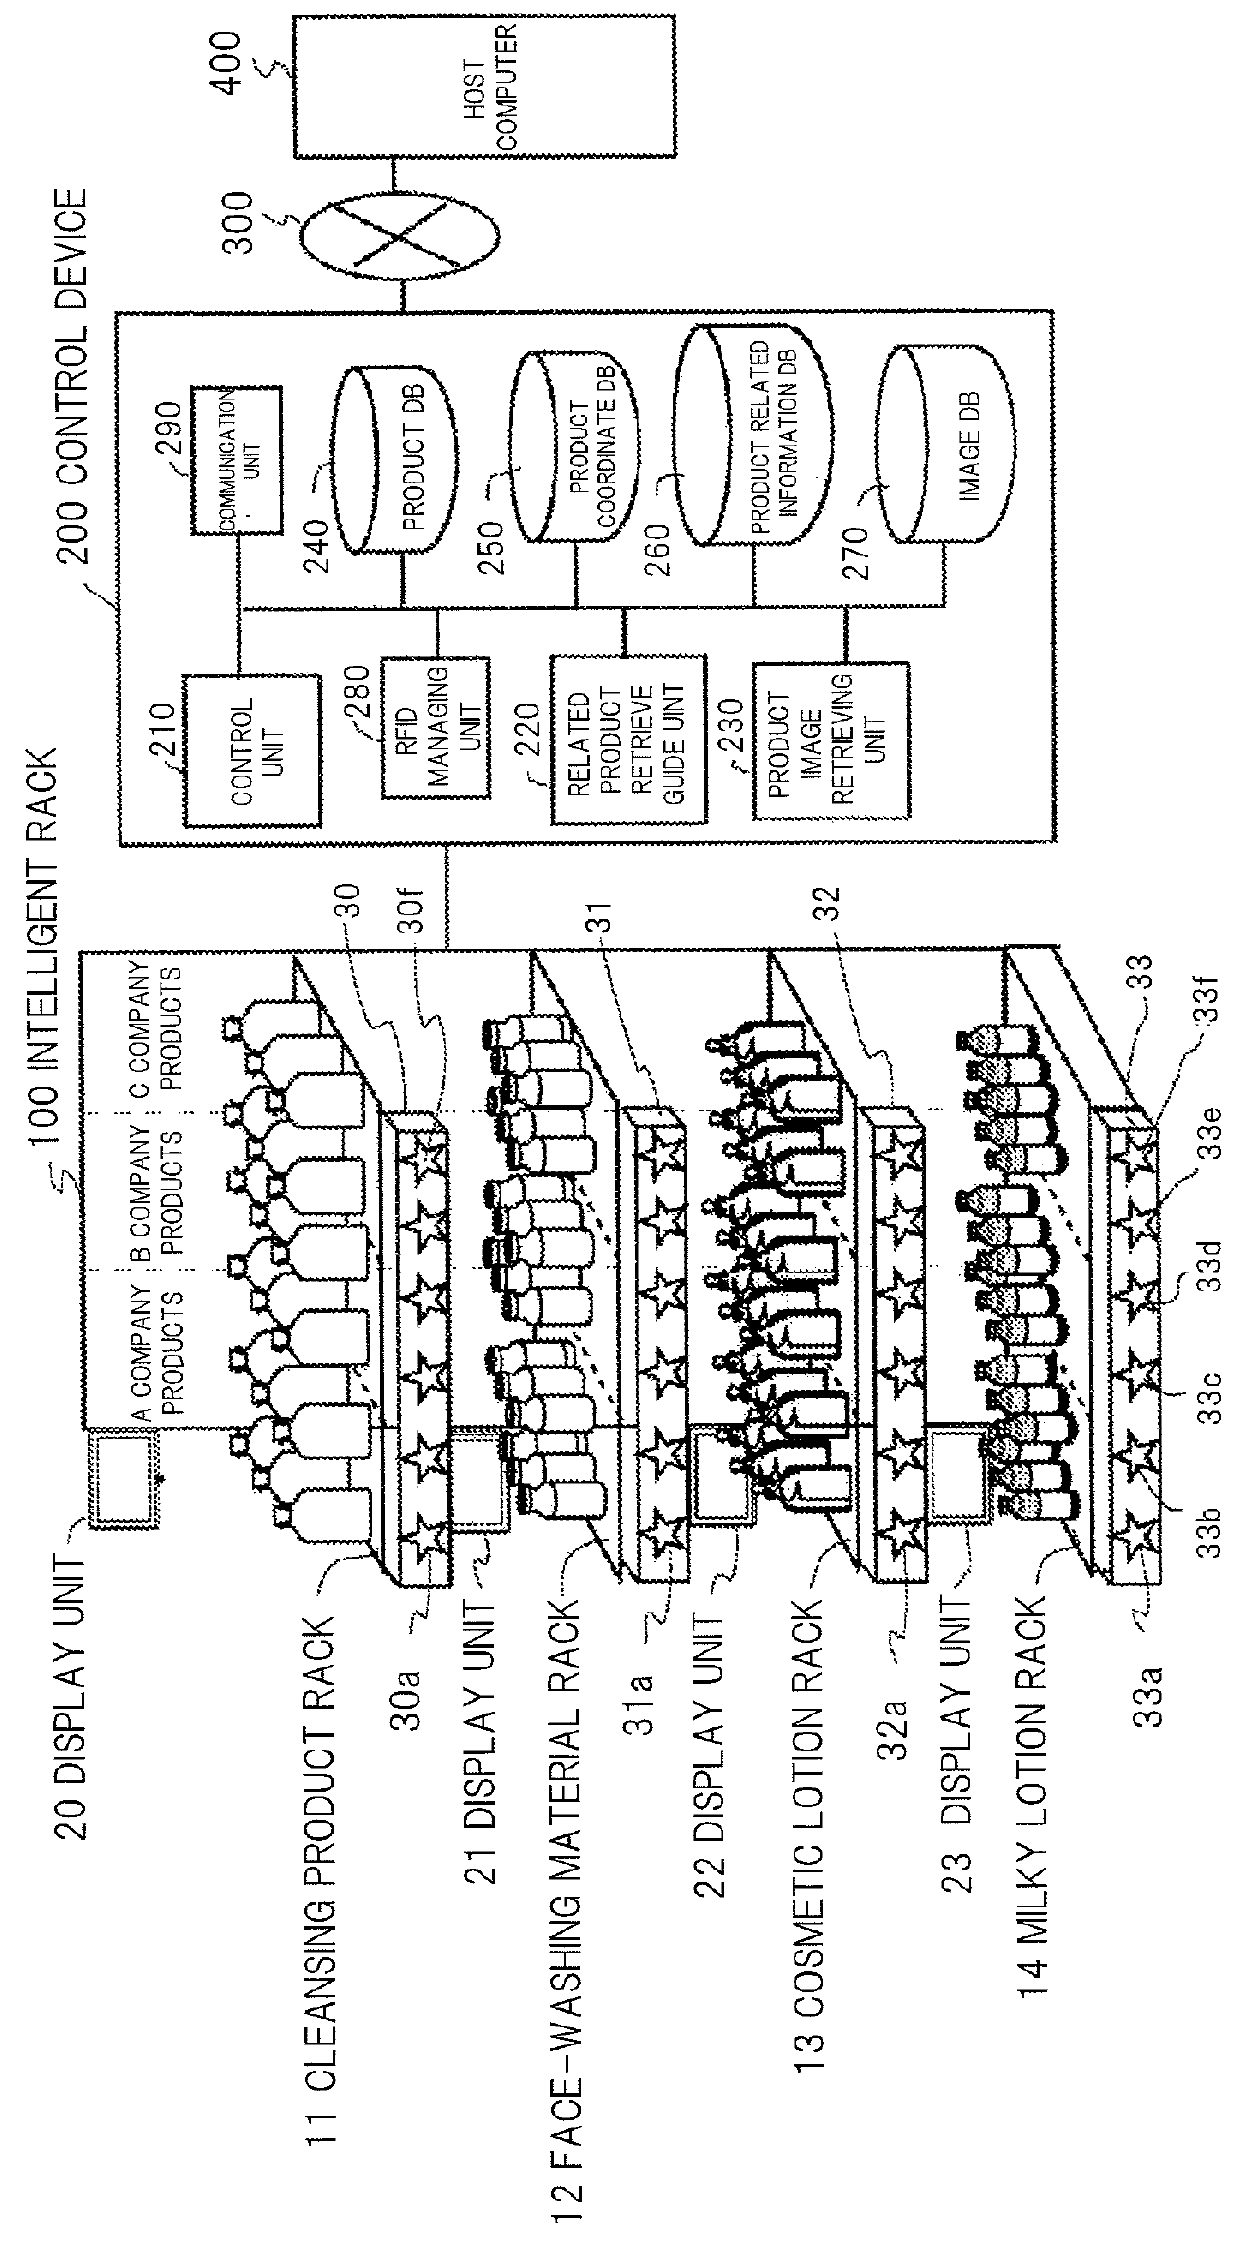 Product display rack system, product display rack method, and product display rack program